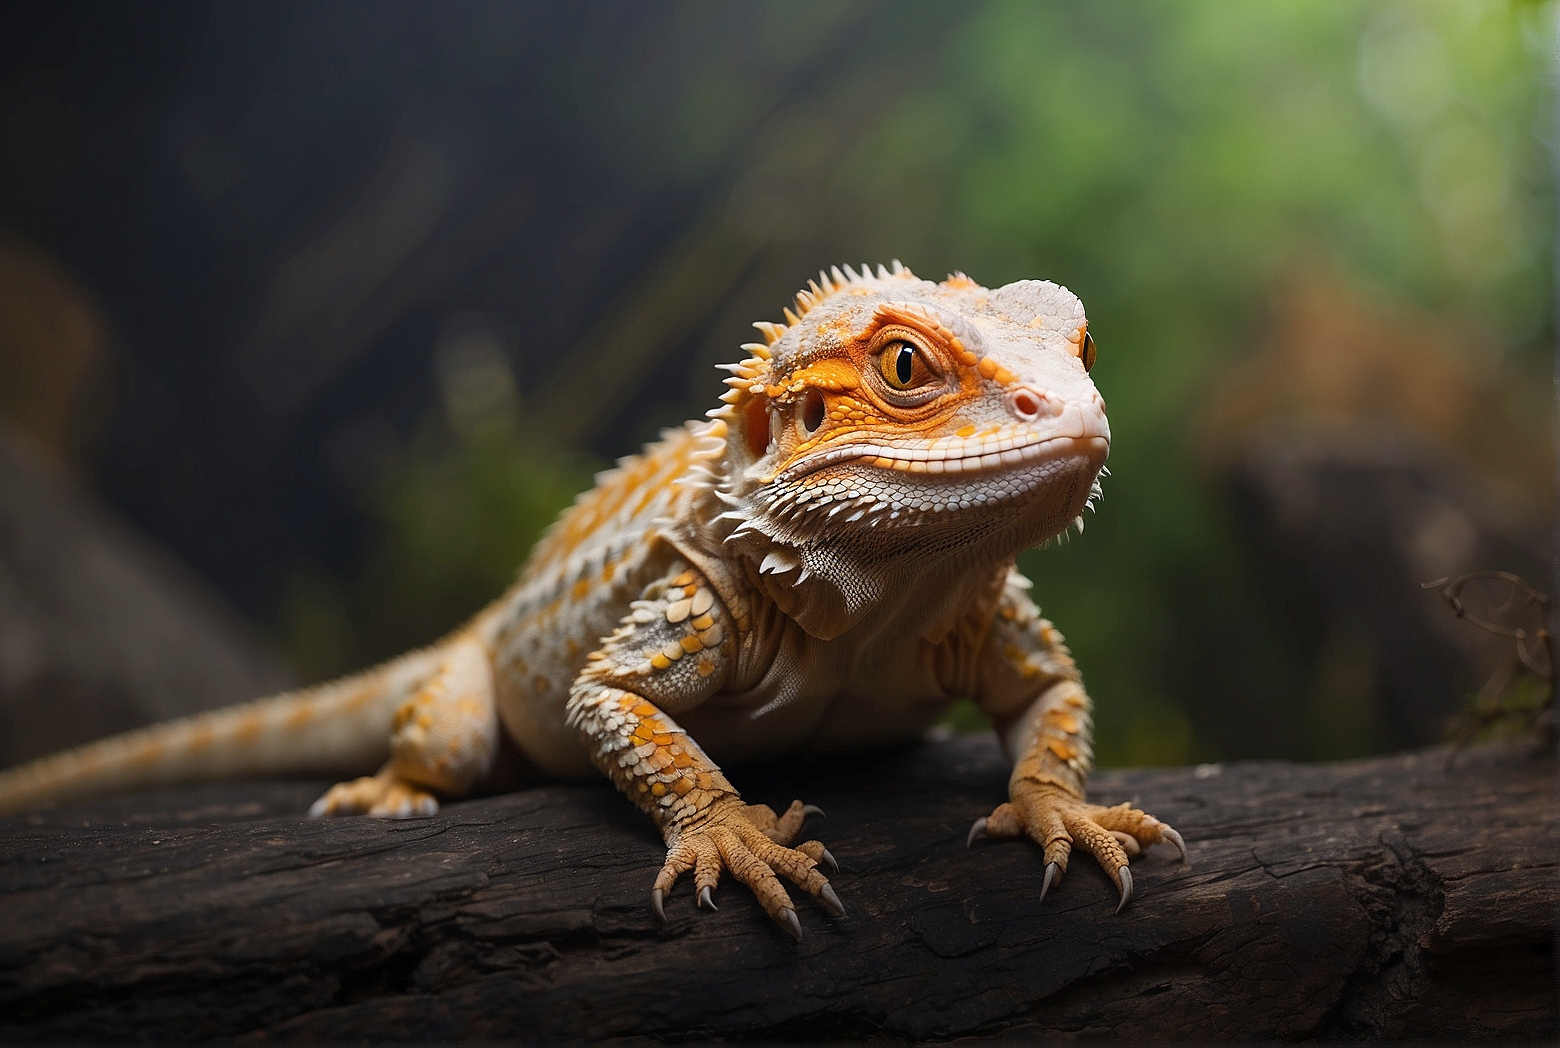 What Are The Different Age Categories For Bearded Dragons?